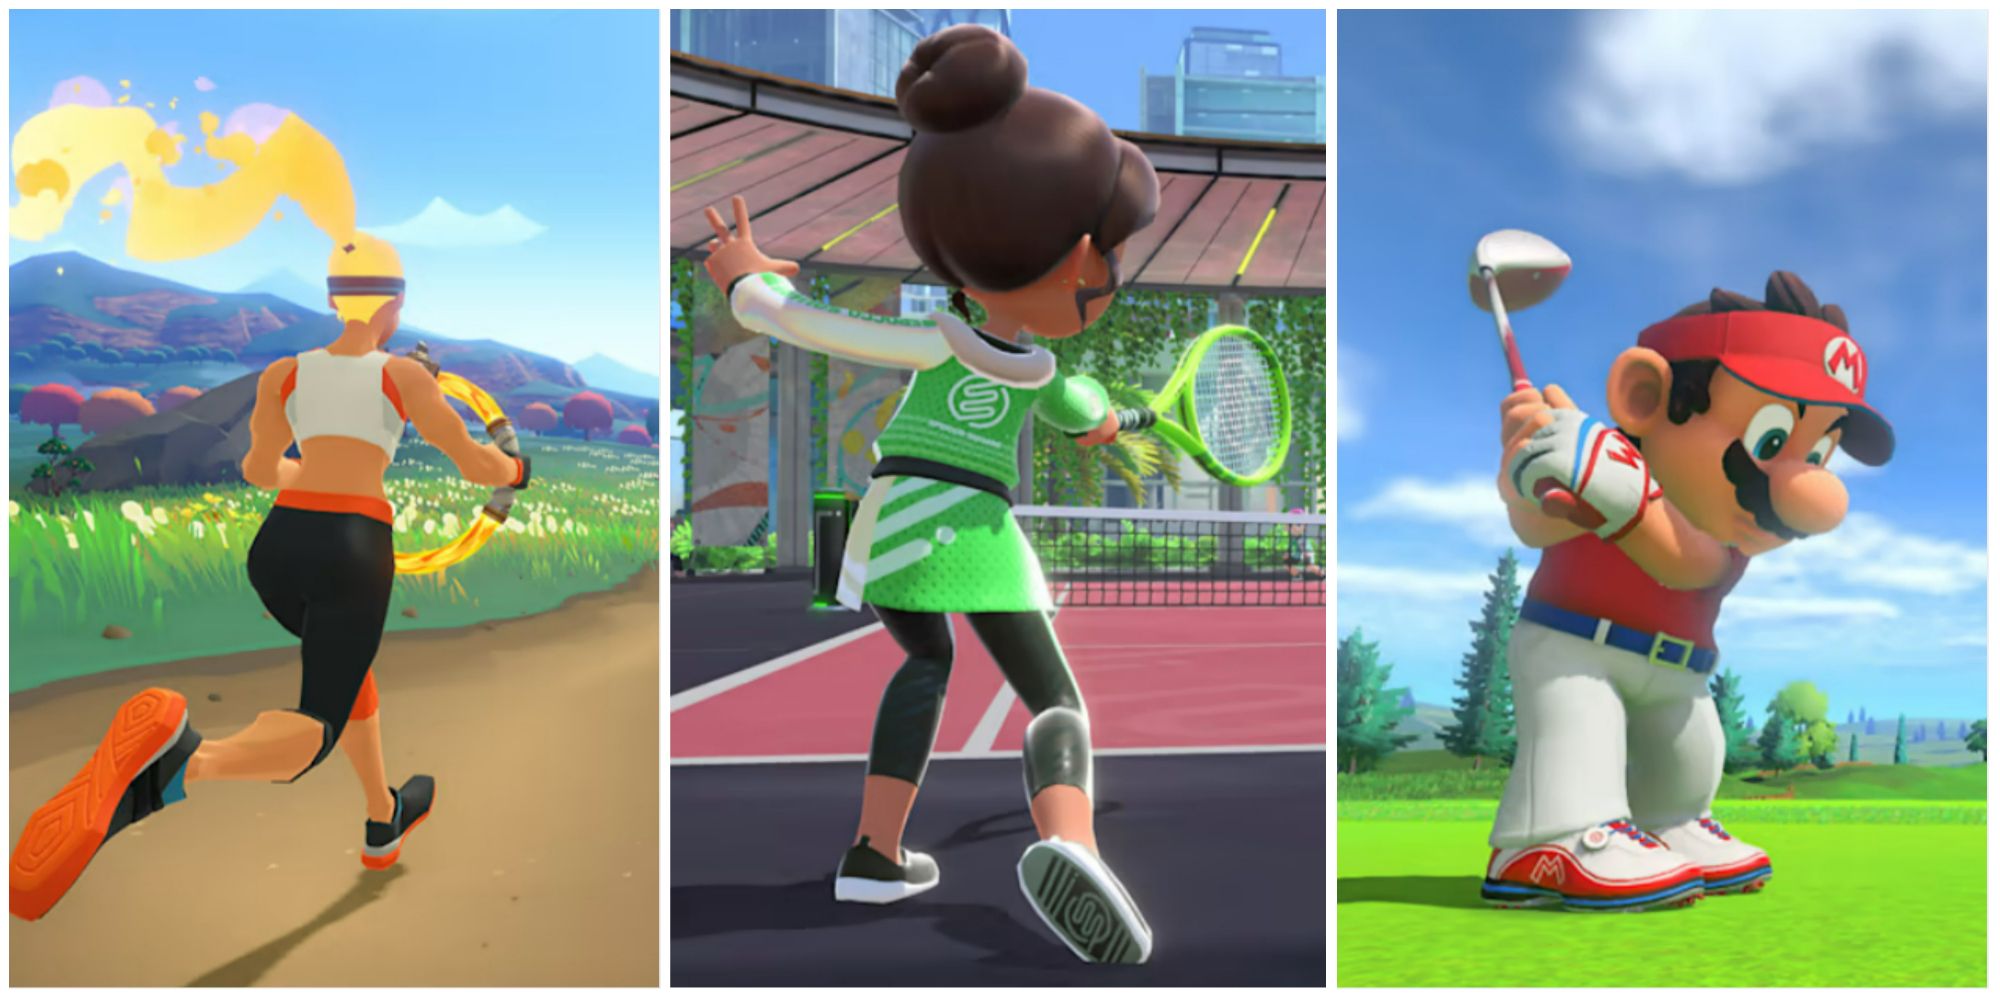 ring fit adventure character running on path, nintendo switch sports character playing tennis, mario golf super rush mario hitting golf ball featured